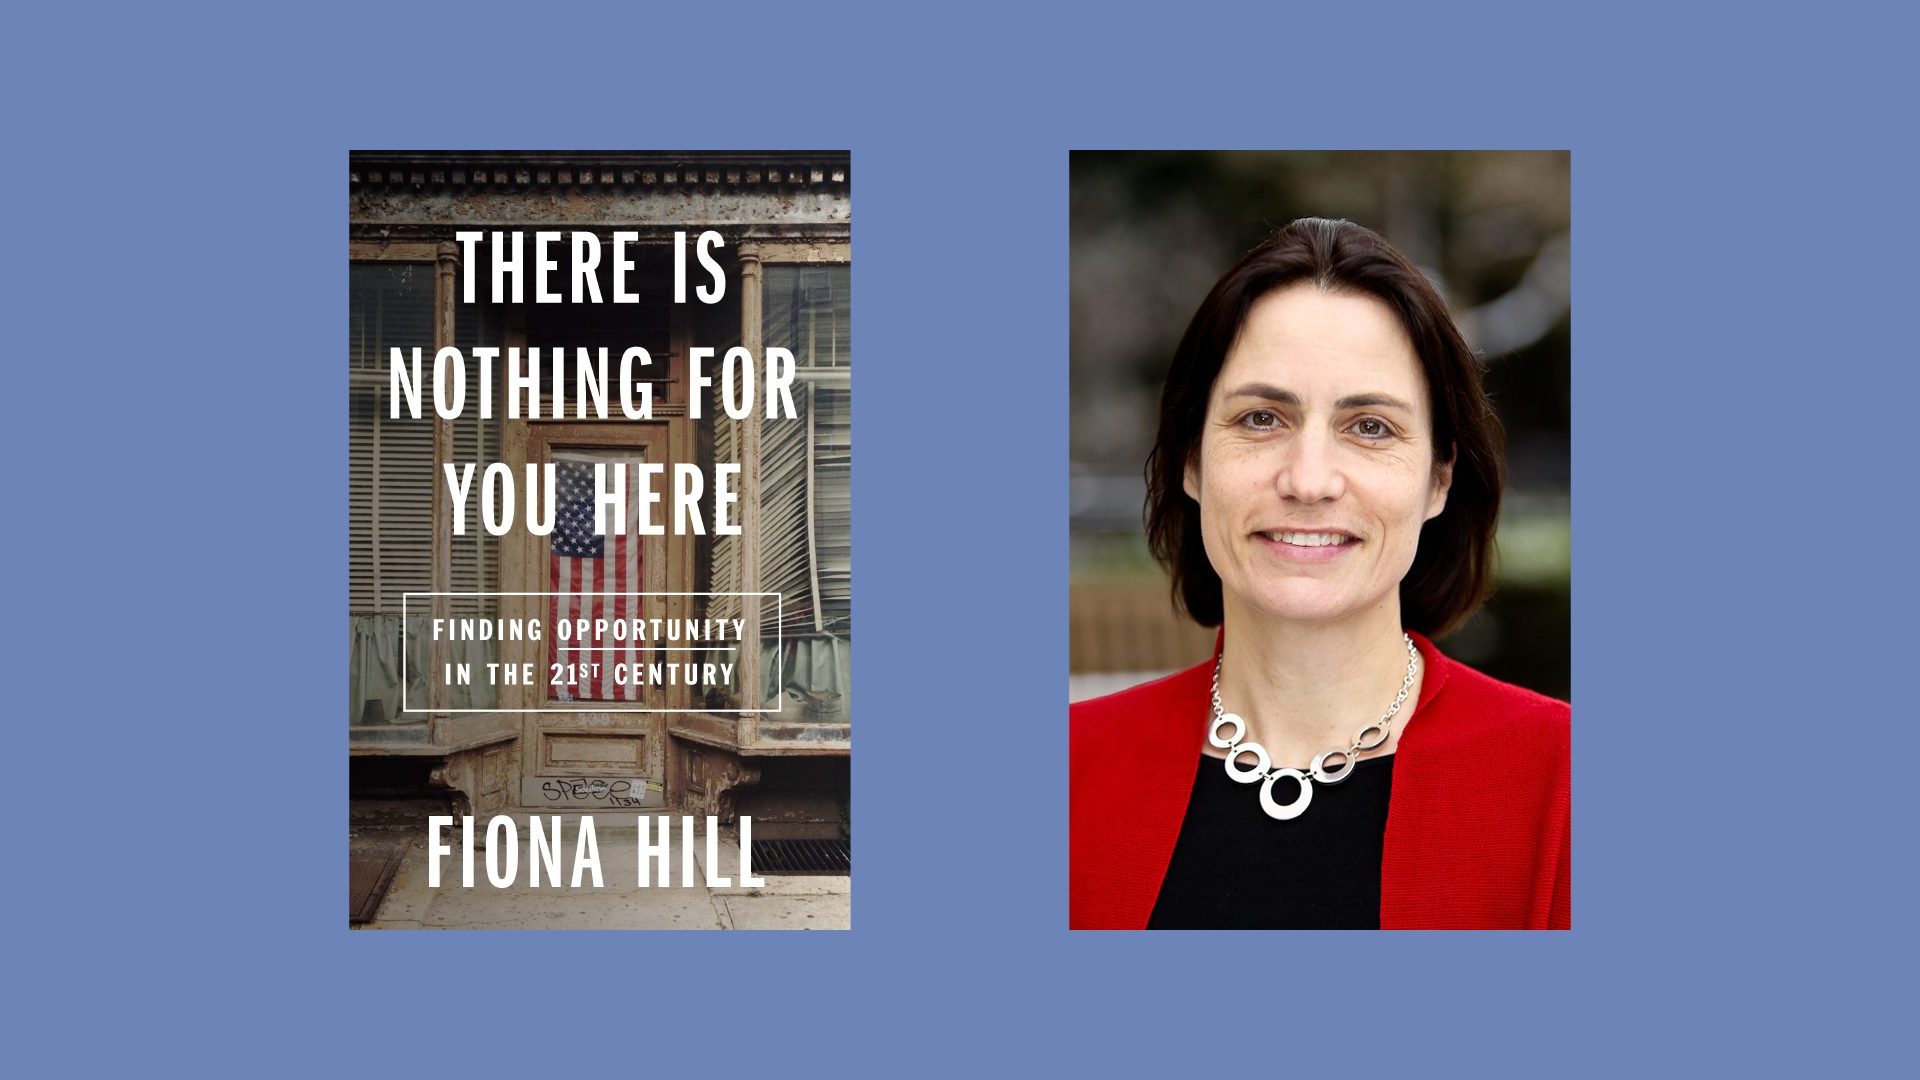 Fiona Hill: From Durham to DC